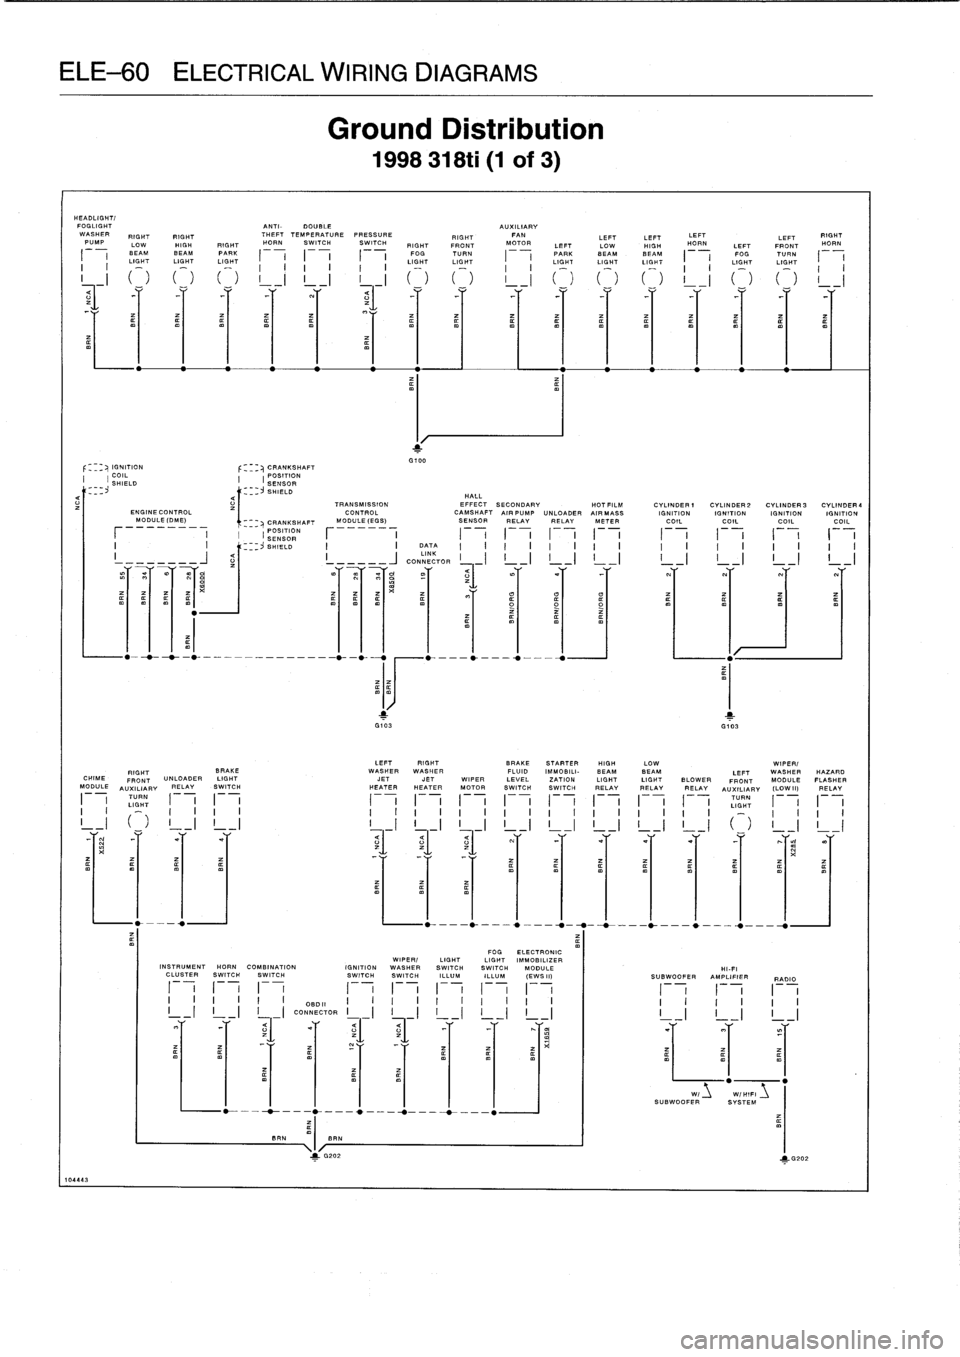 BMW 328i 1997 E36 Service Manual 
ELE-60
ELECTRICAL
WIRING
DIAGRAMS

HEADLIGHT/
FOGLIGHT

	

ANTI-
DOUBLE

	

AUXILIARY
WASHER

	

RIGHT

	

RIGHT

	

THEFT
TEMPERATURE
PRESSURE

	

RIGHT

	

FAN

	

LEFT

	

LEFT

	

LEFT

	

LEFT

